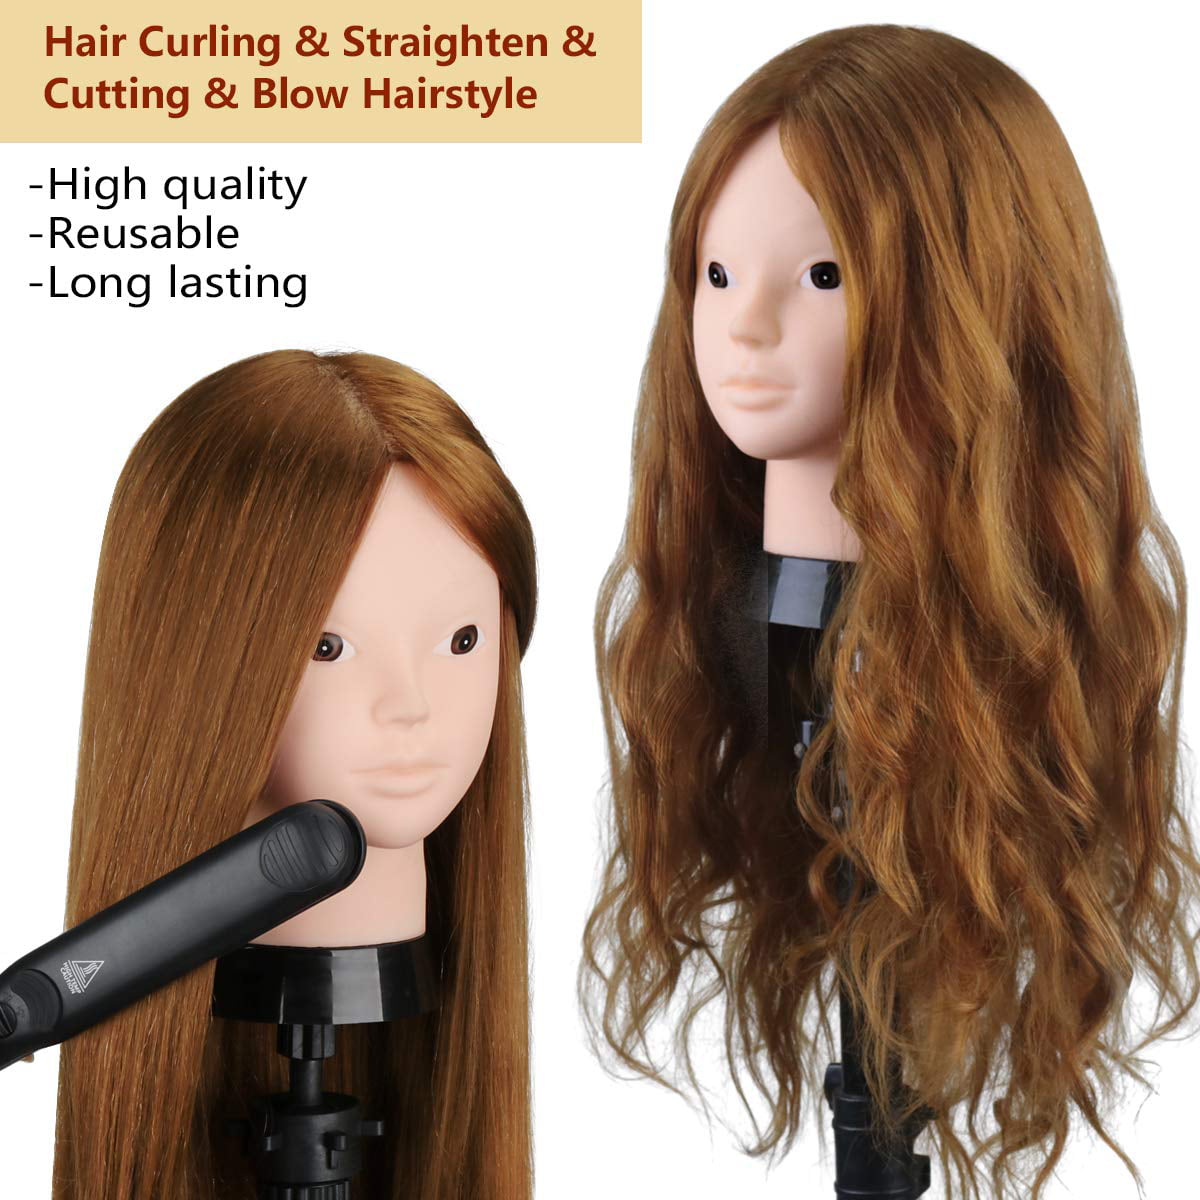 80% Human Hair Mannequin Heads For Hairdresser Practice Hair Styling  Training Doll Head Can Practice